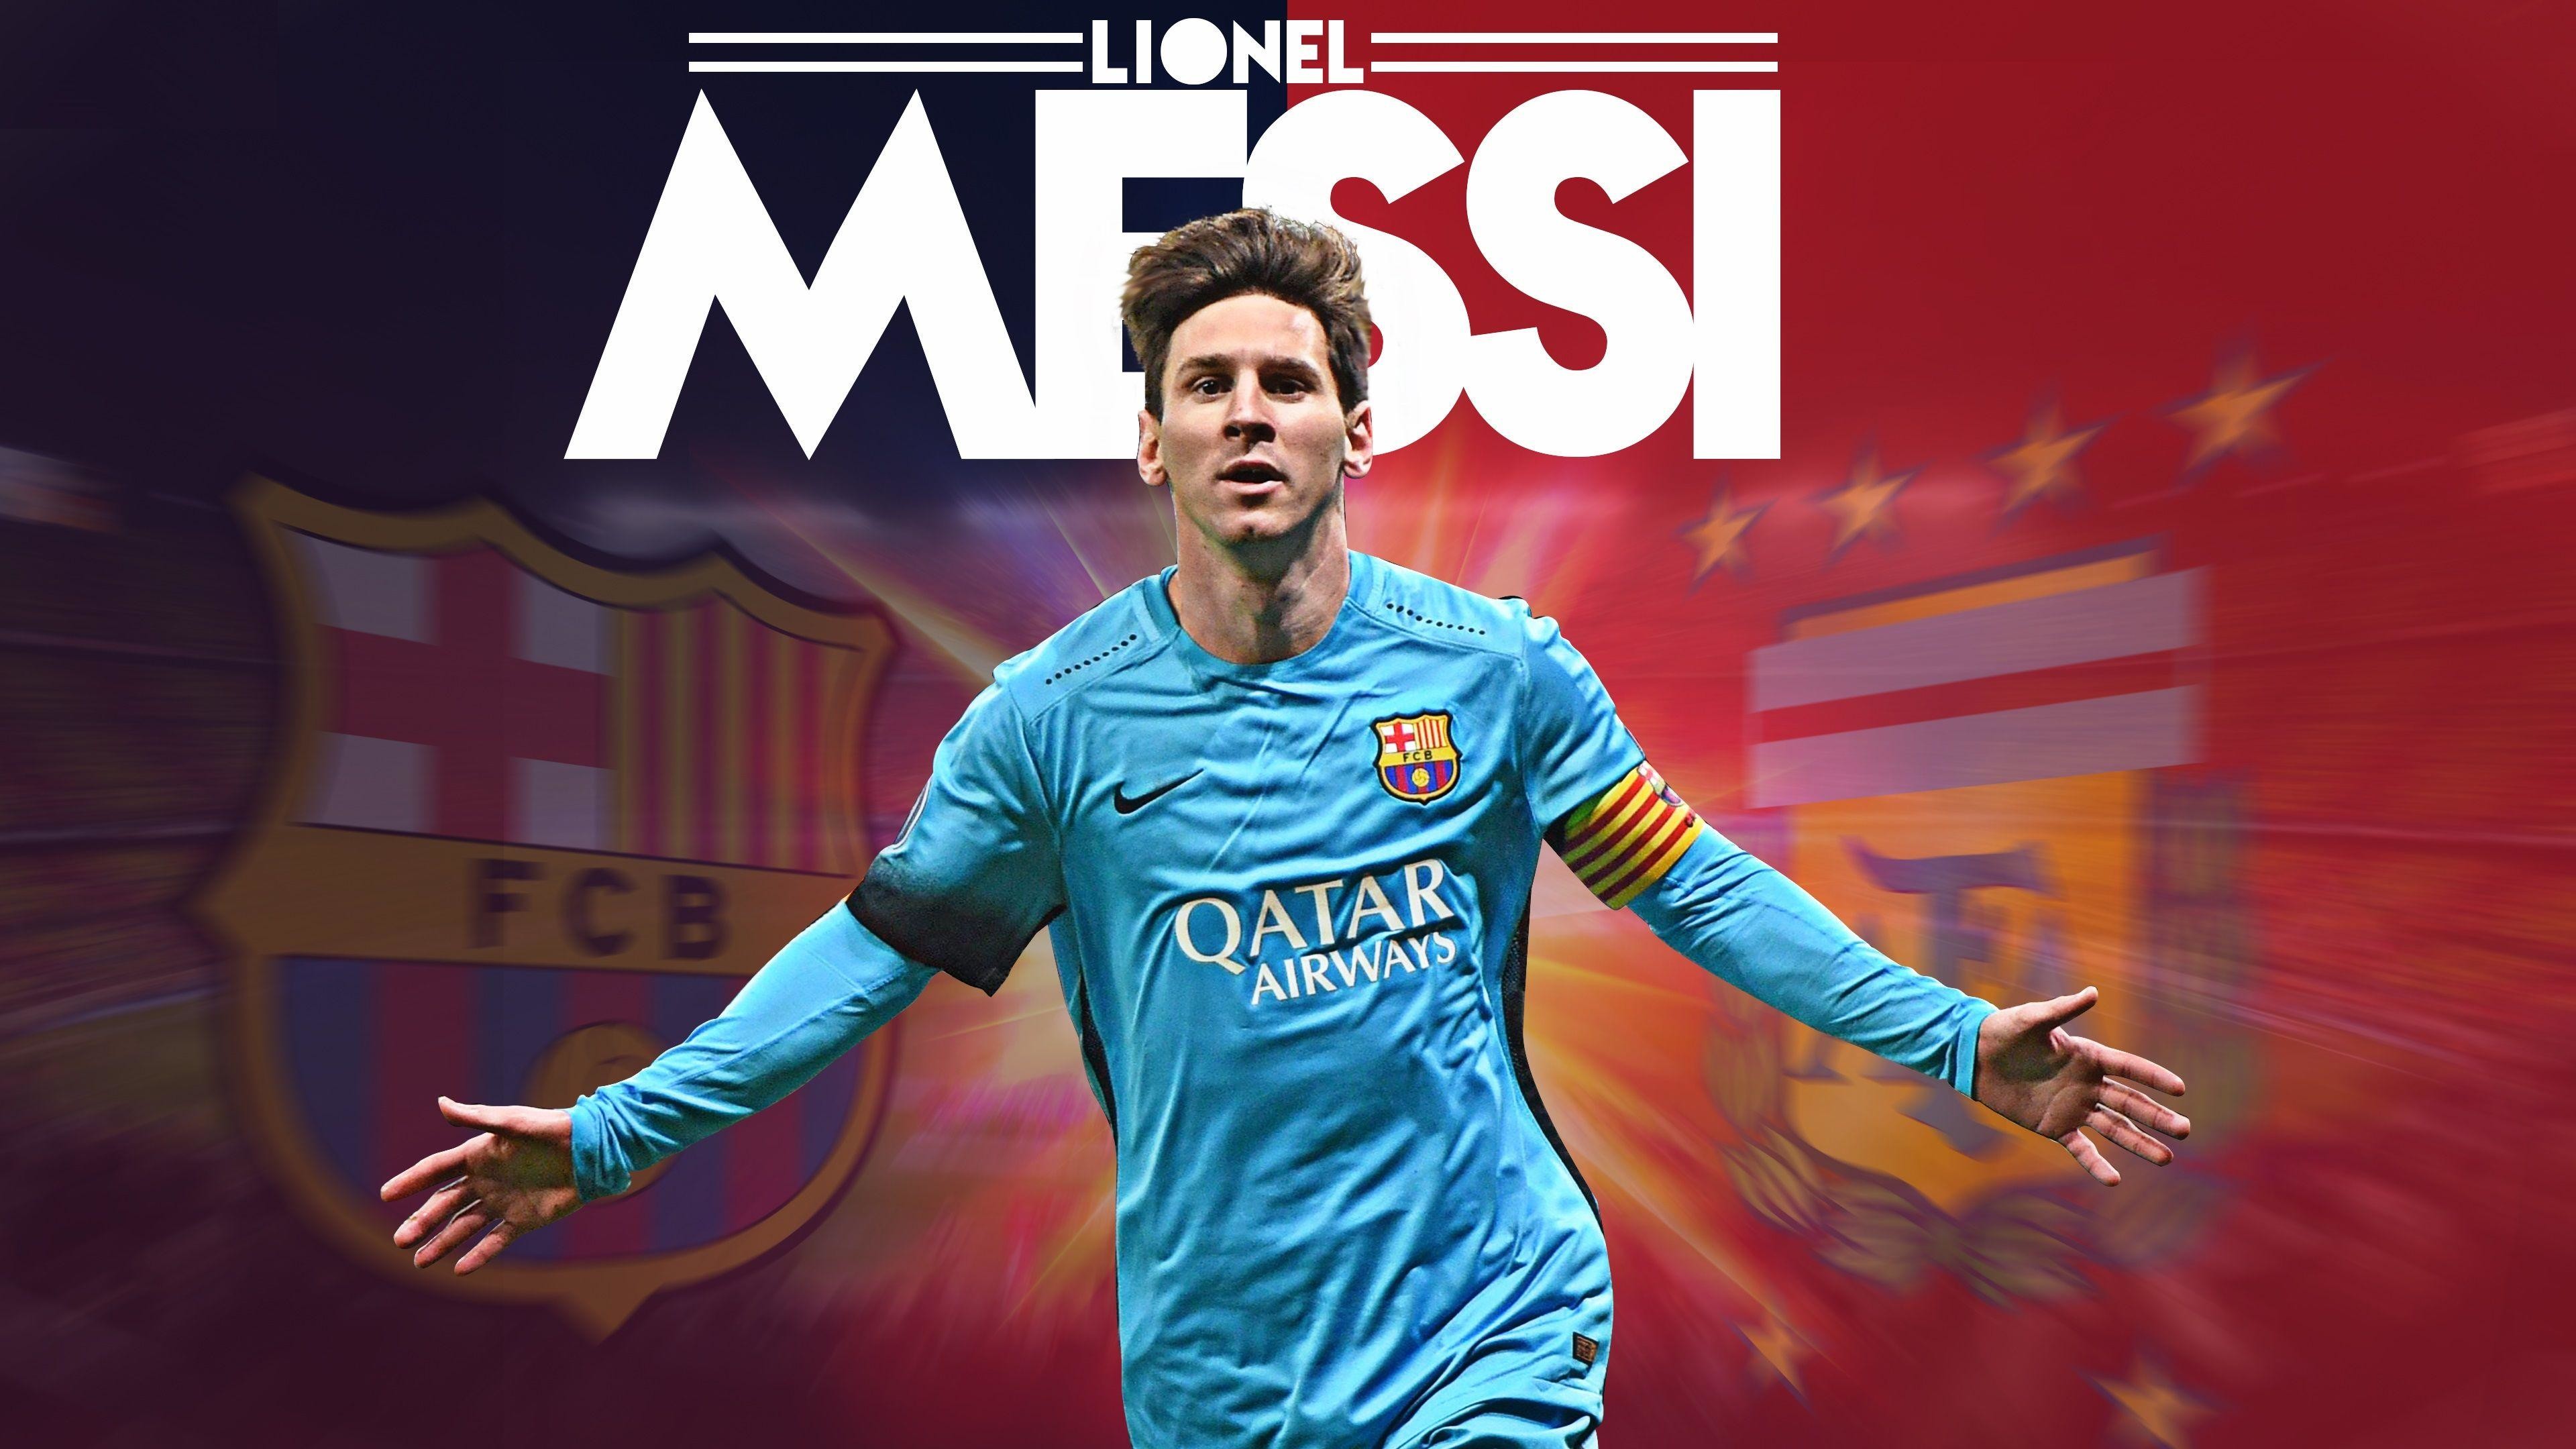 3840x2160 Leo Messi HD Wallpapers - New HD Images